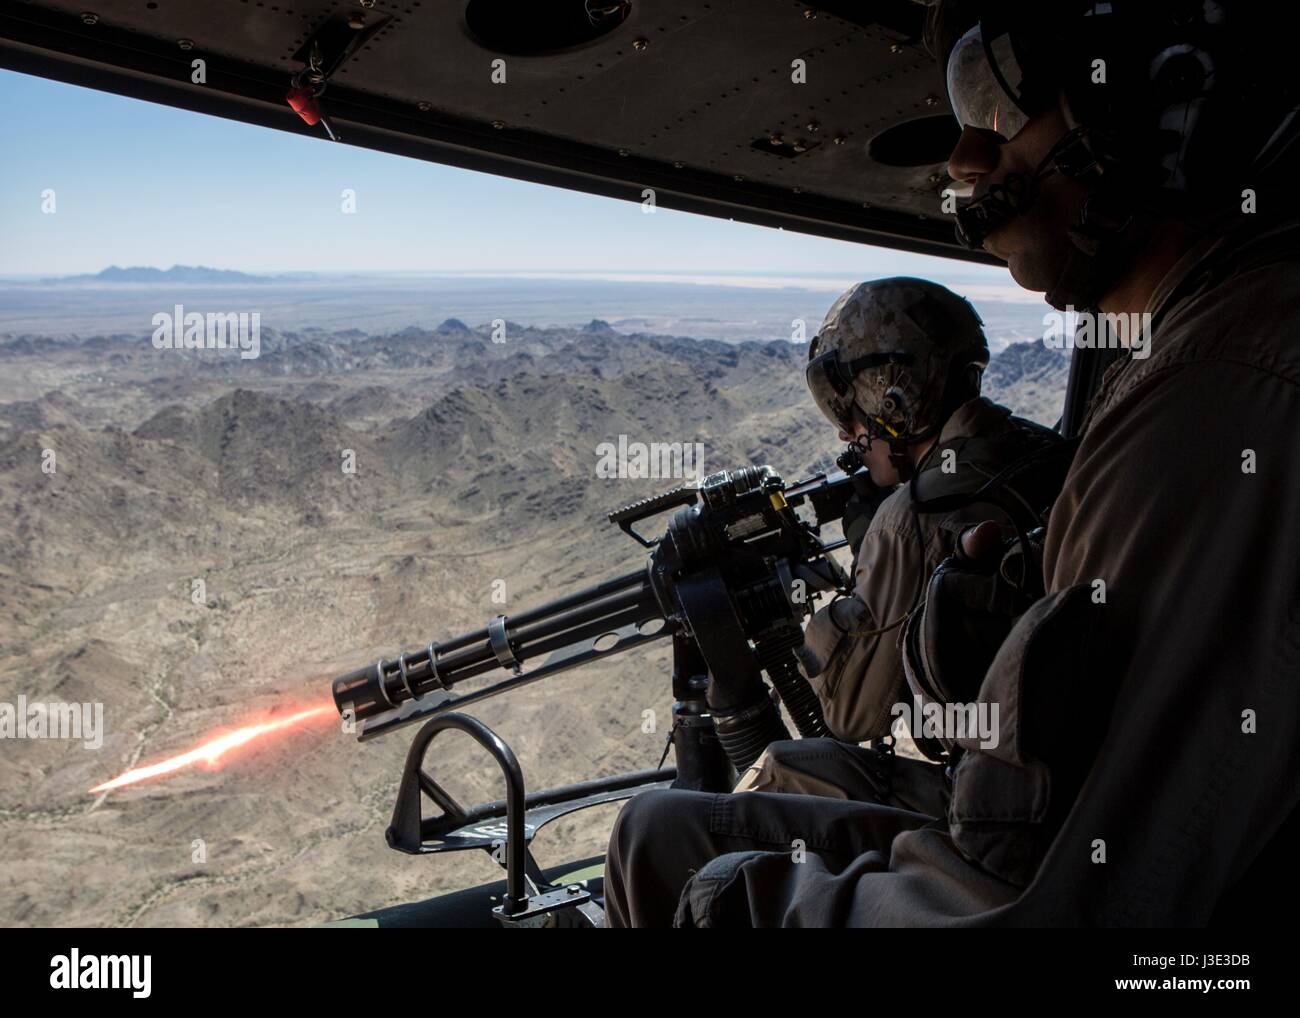 U.S. Marine soldiers fire a GAU-17 Vulcan Gatling machine gun cannon from a USMC UH-1Y Venom helicopter during an aerial gunnery drill at the Chocolate Mountain Aerial Gunnery Range April 5, 2017 in Niland, California.    (photo by Clare J. Shaffer/US Marines via Planetpix) Stock Photo